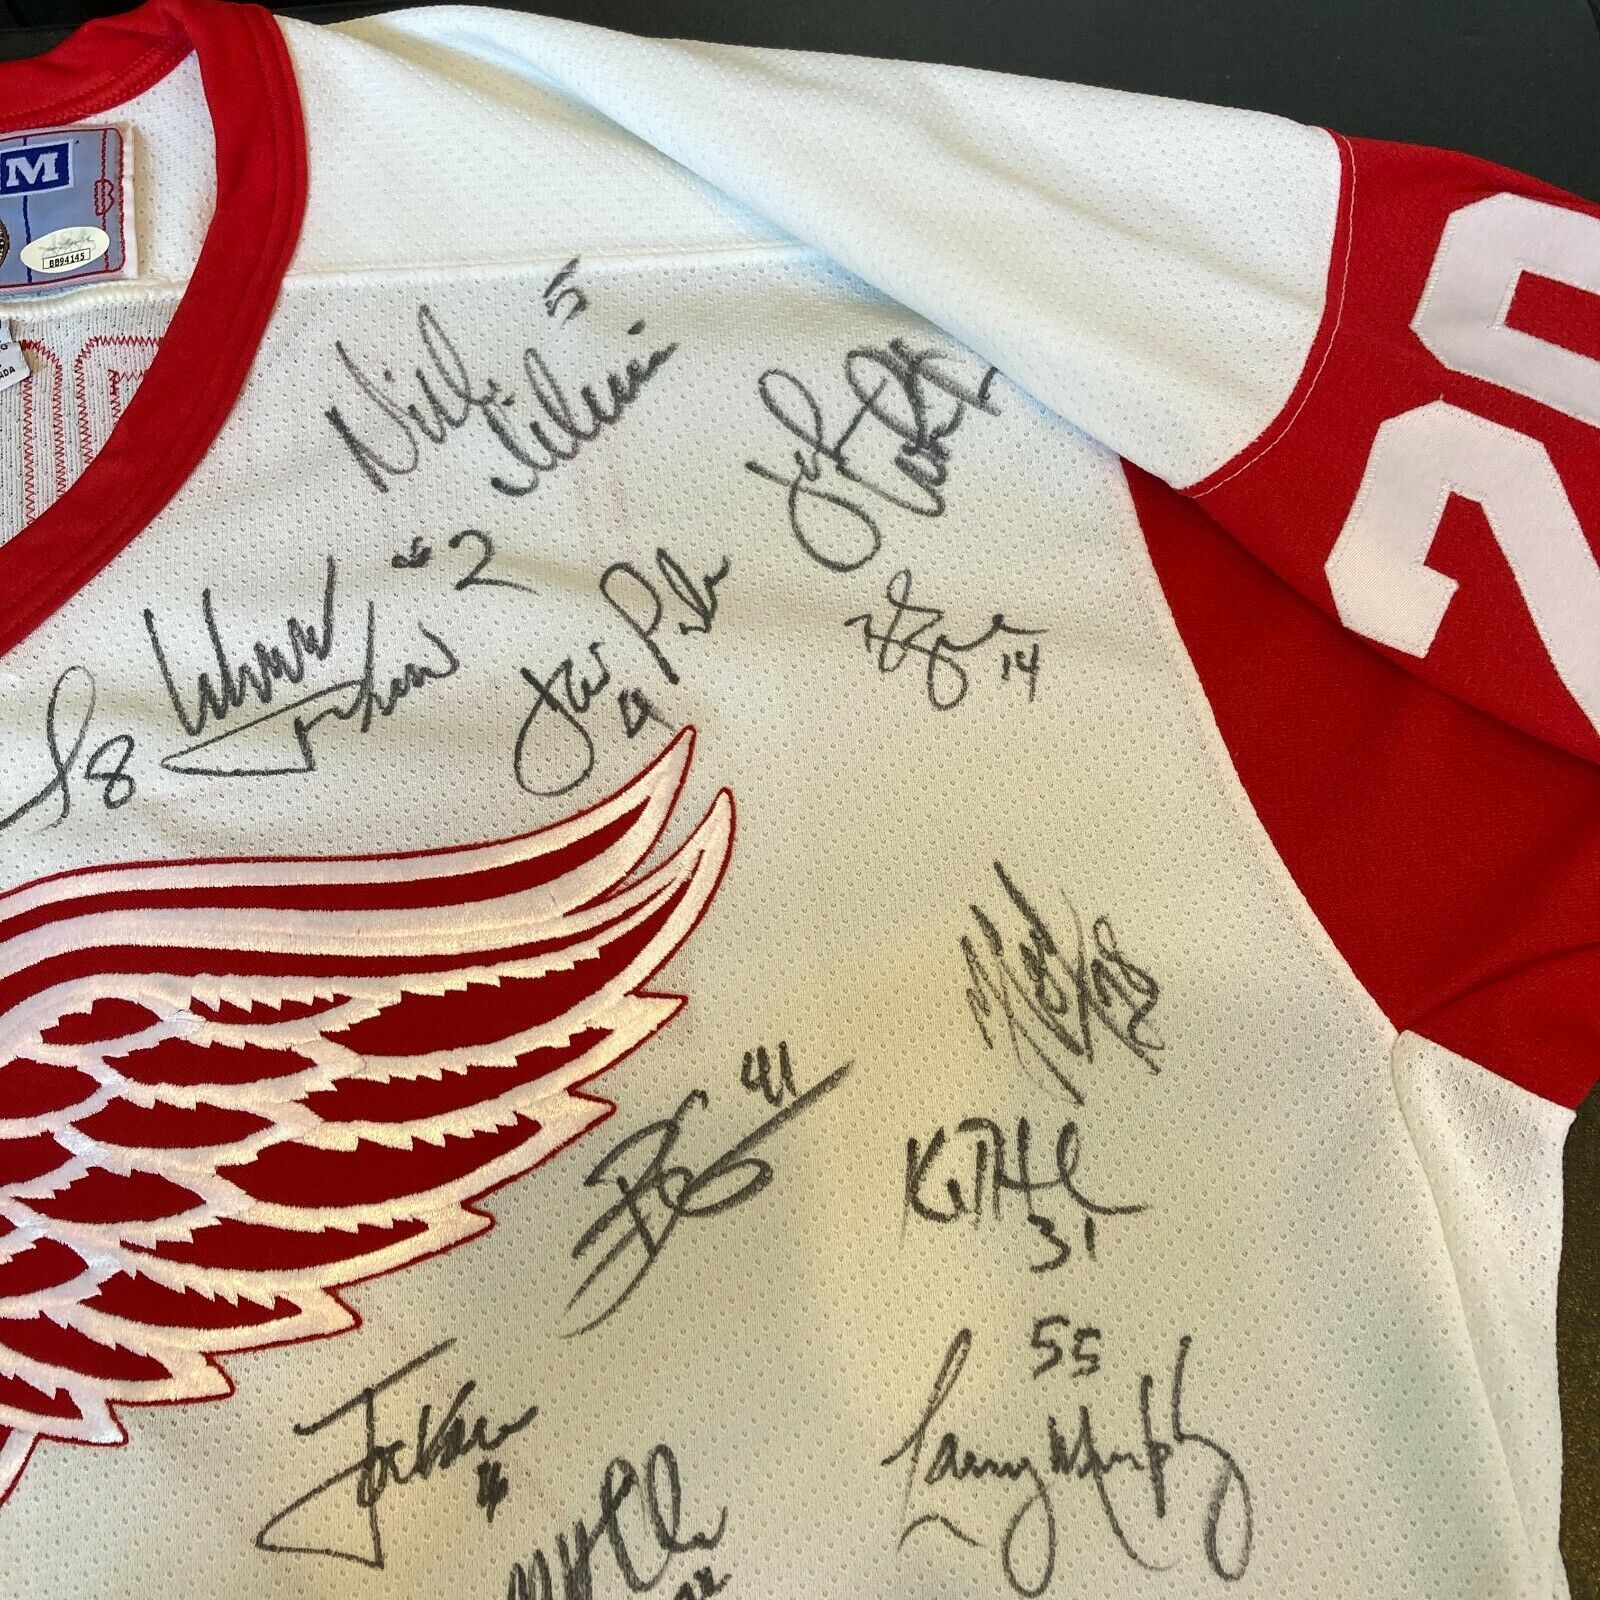 VLADIMIR KONSTANTINOV SIGNED DETROIT RED WINGS JERSEY PSA/DNA AUTHENTICATED